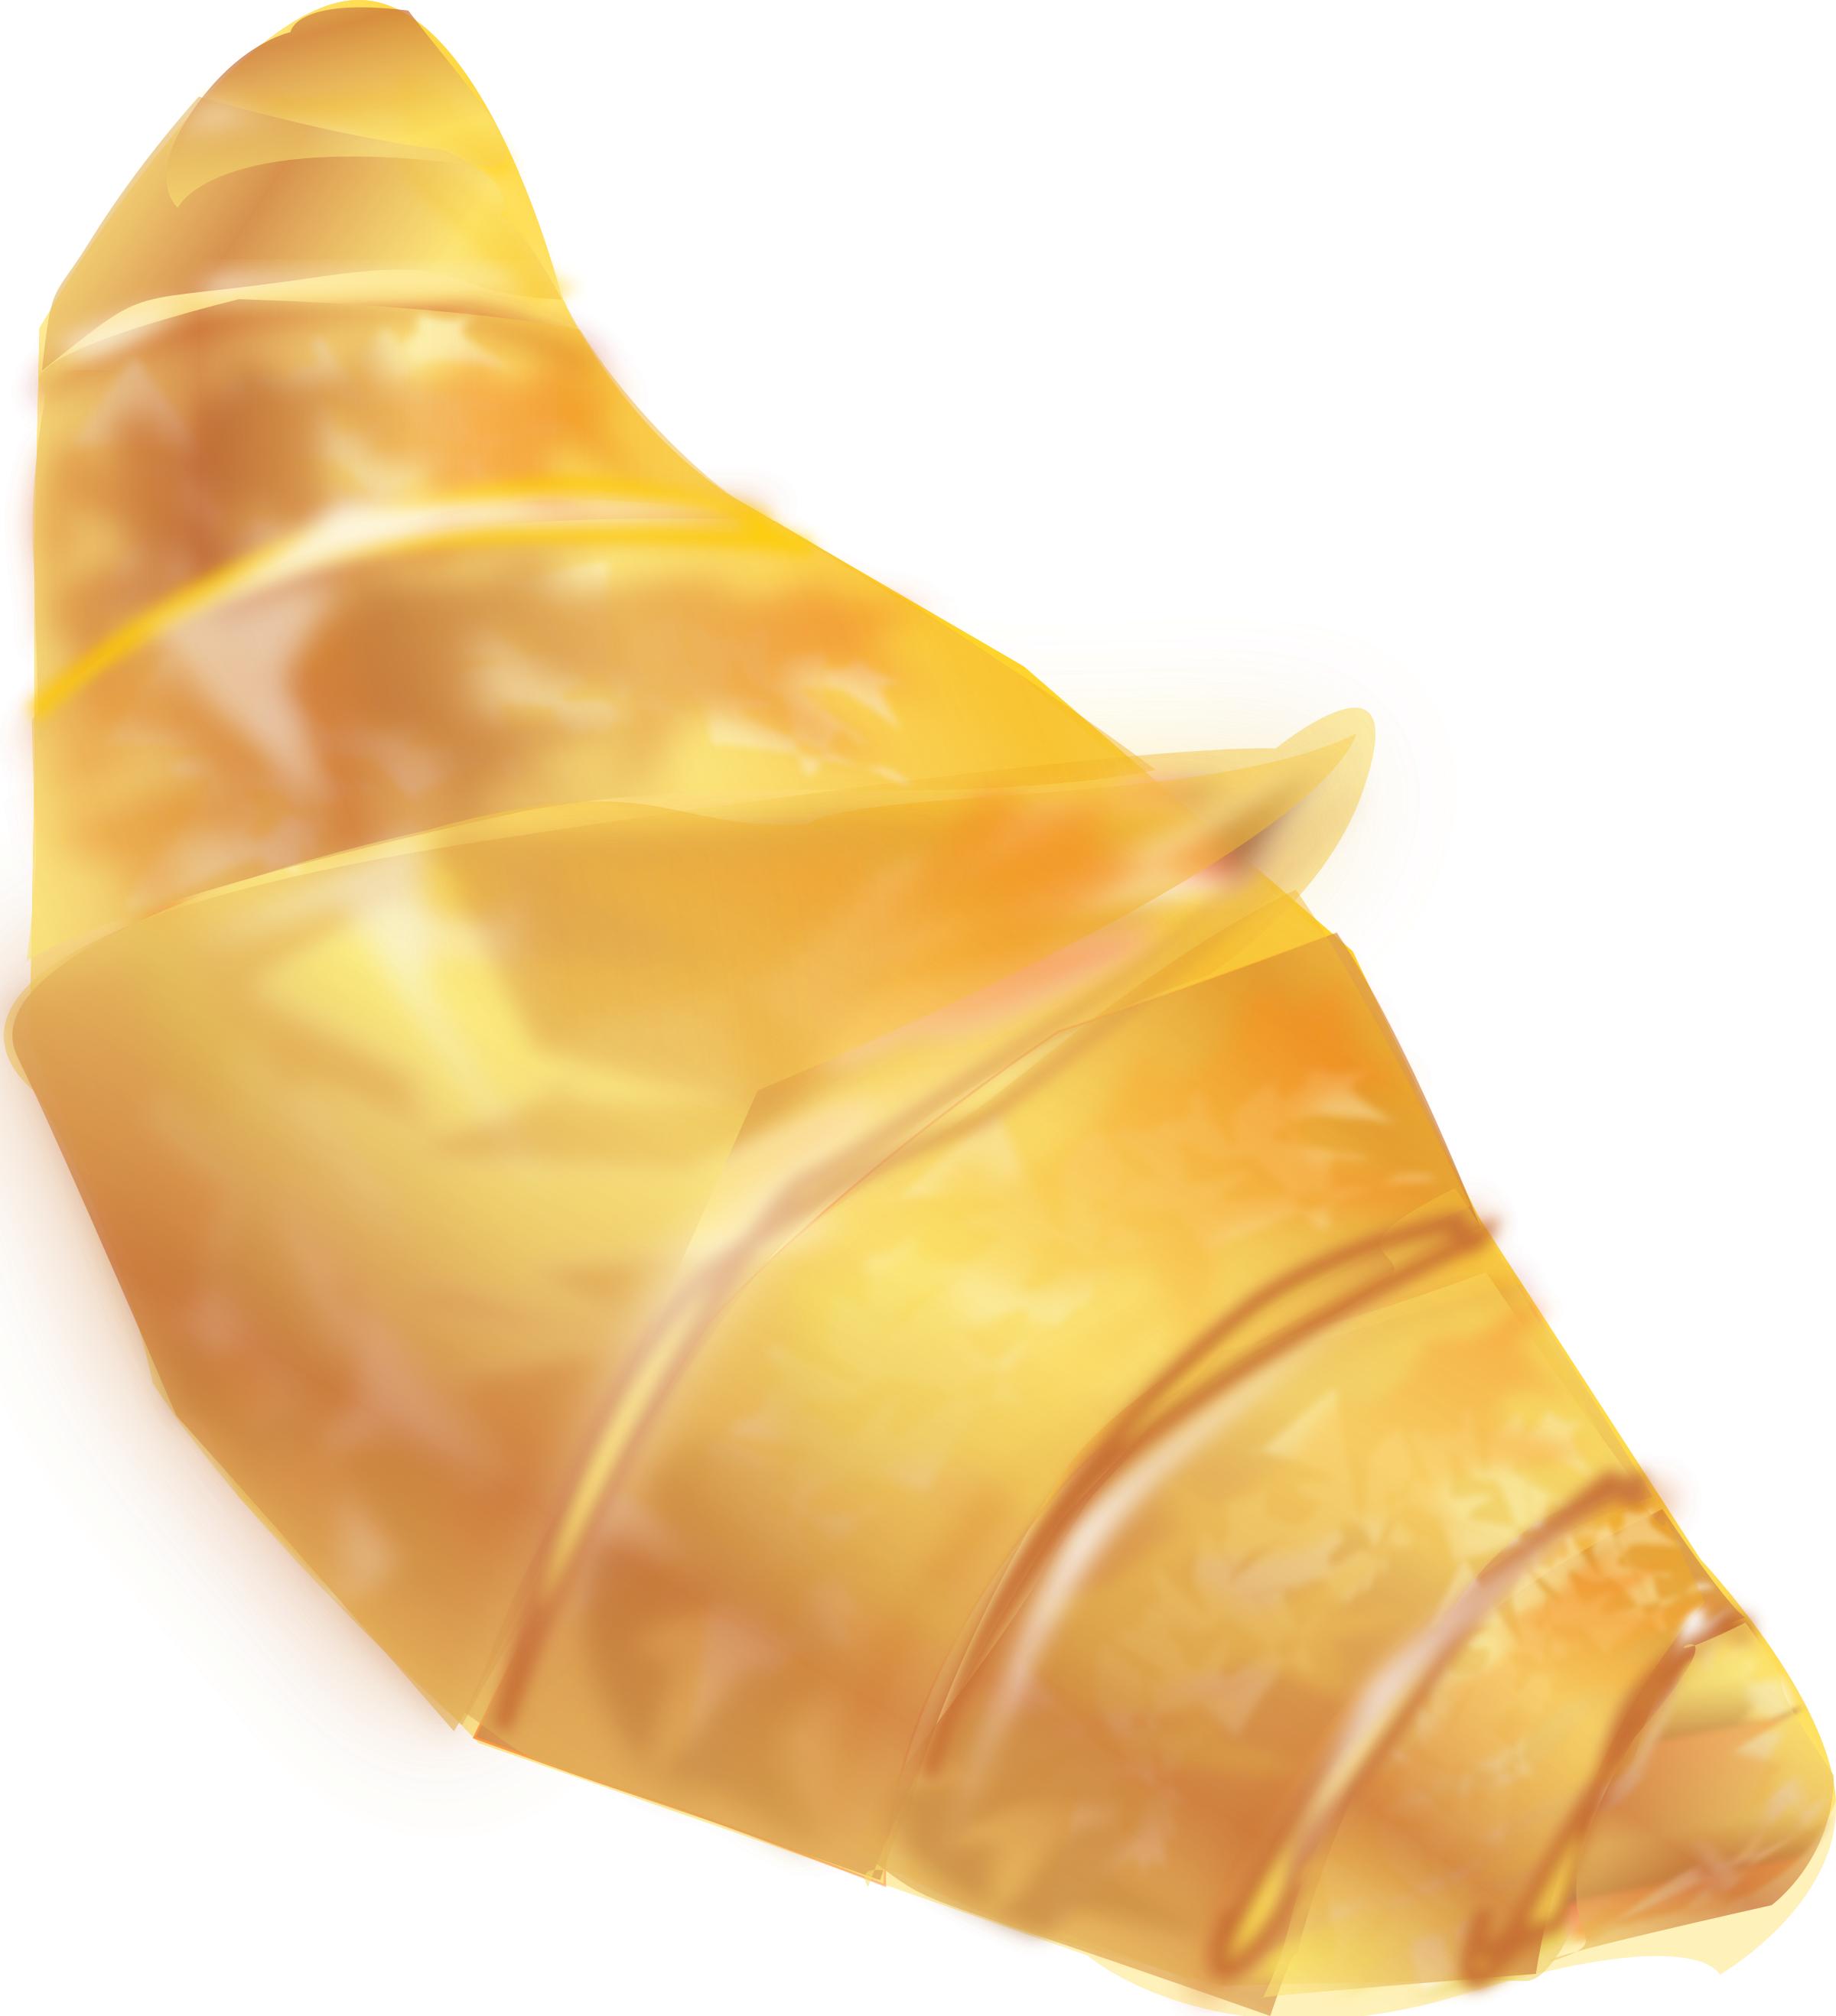 French butter croissant png